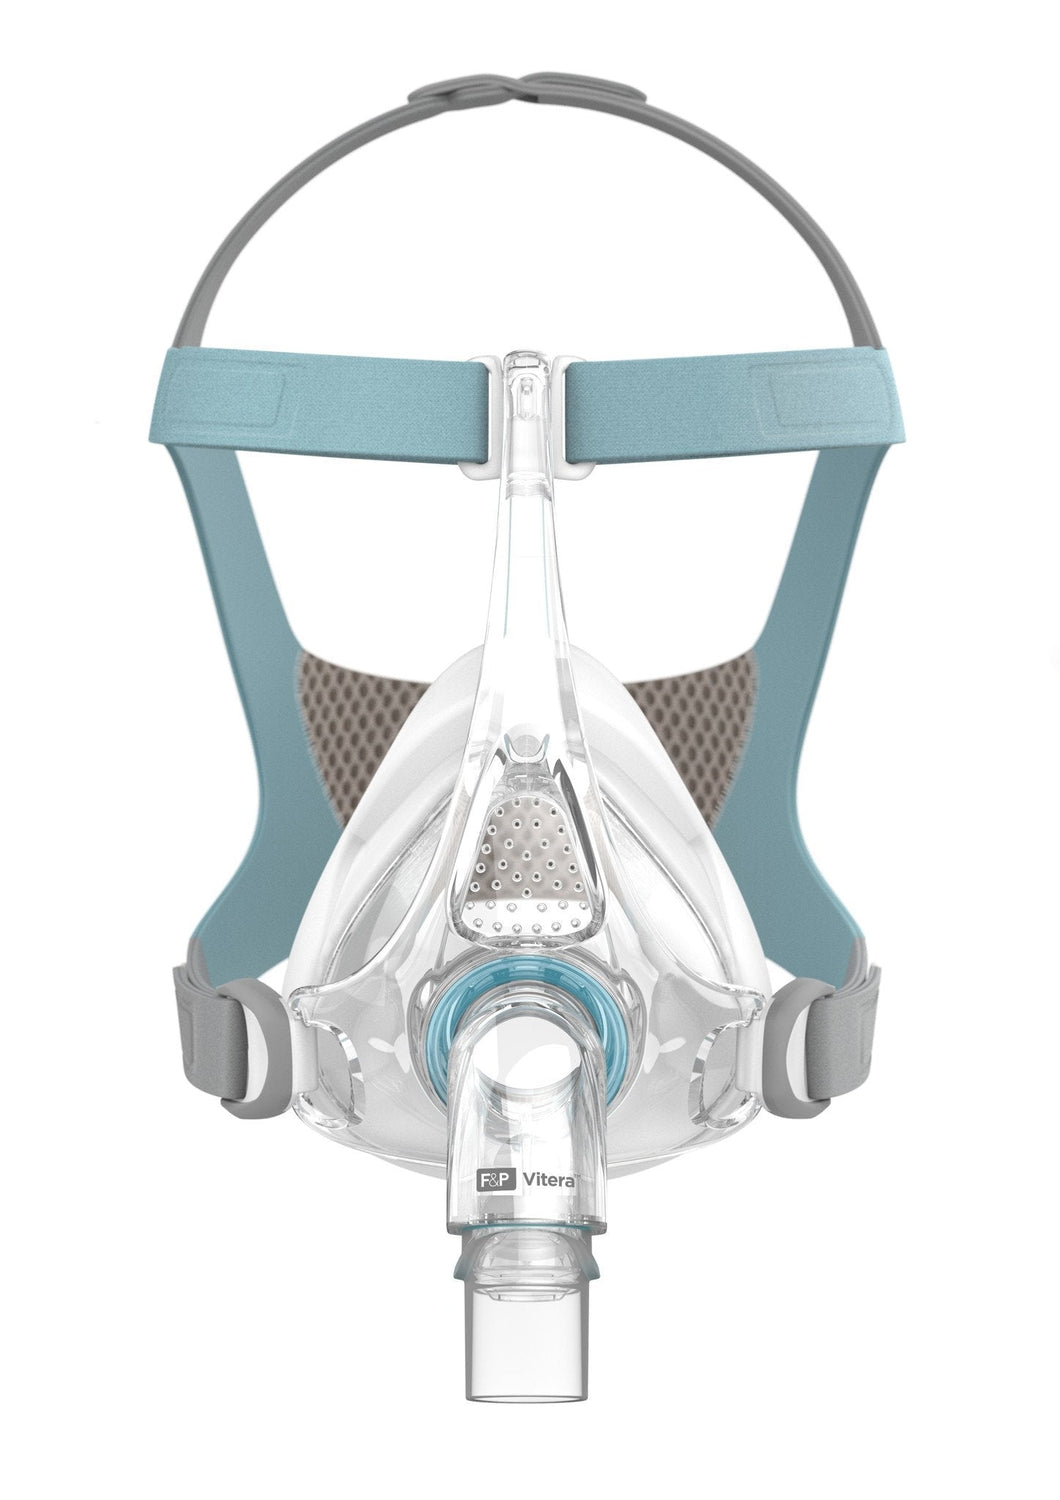 NEW! Fisher & Paykel Vitera Full Face Mask - Fisher & Paykel -  NSW CPAP